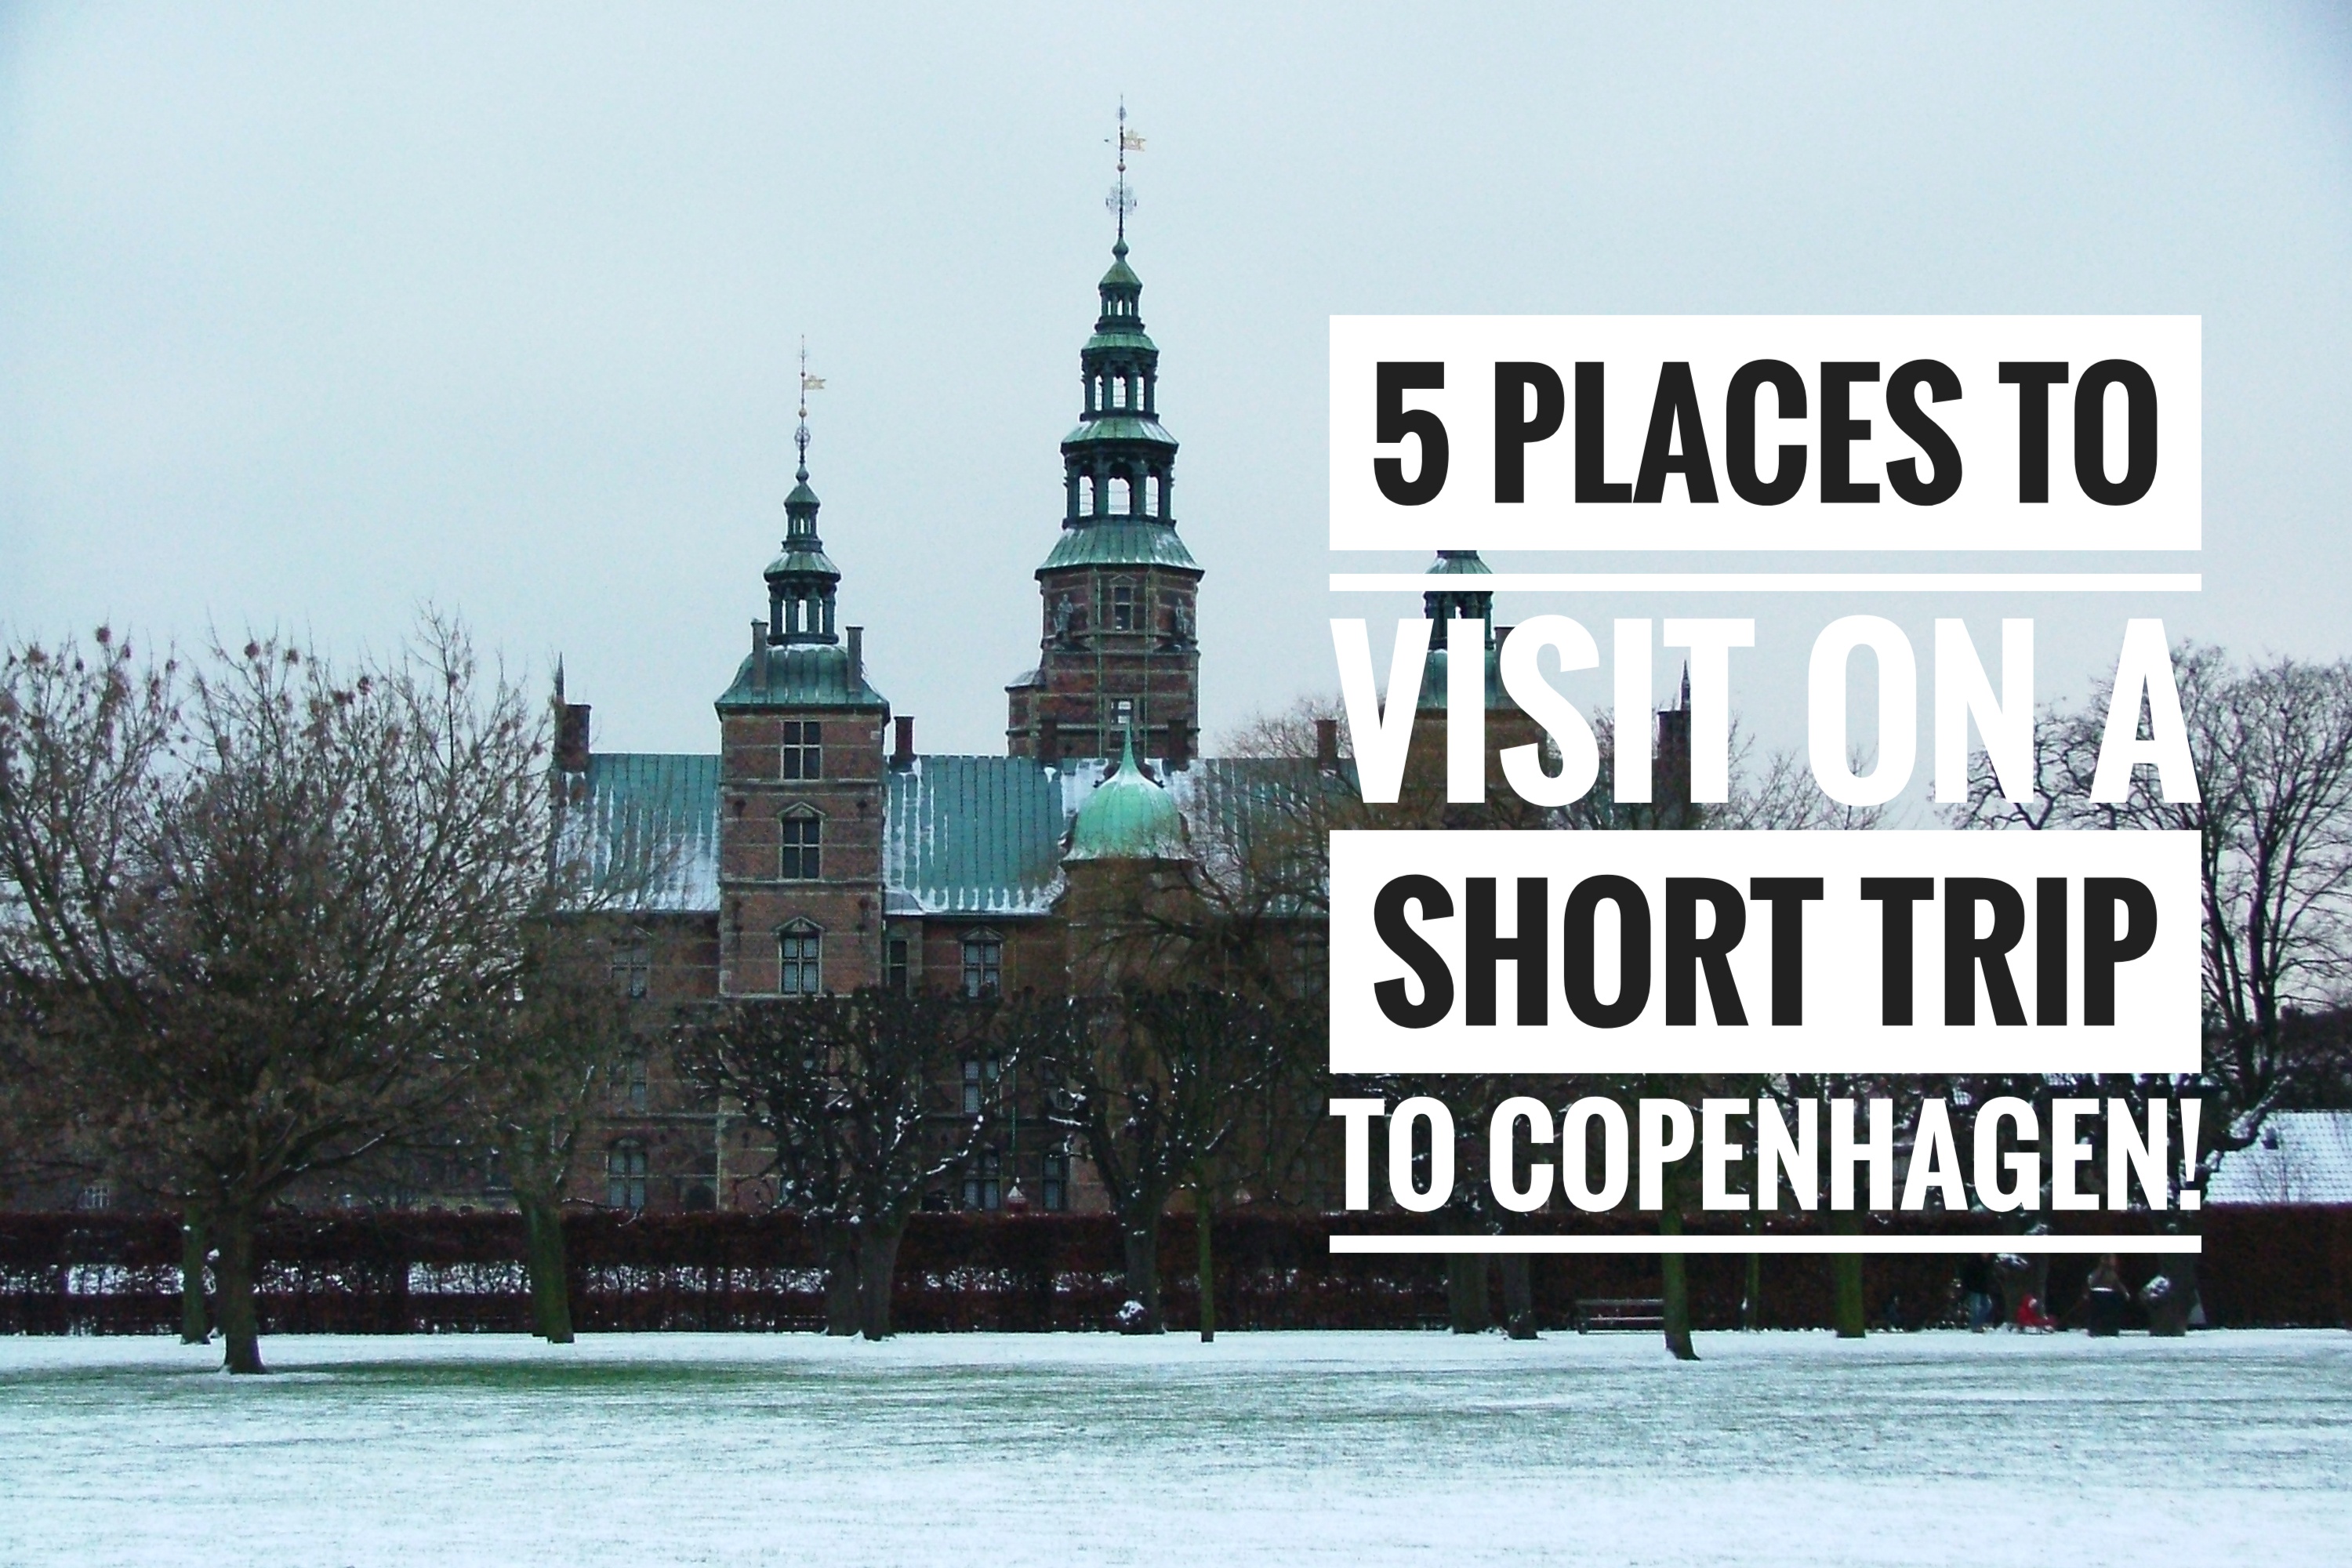 There are so many Treasures Of Traveling to discover while visiting Copenhagen, but if you are short on time, here are 5 interesting places to explore while touring the capital city of Denmark.